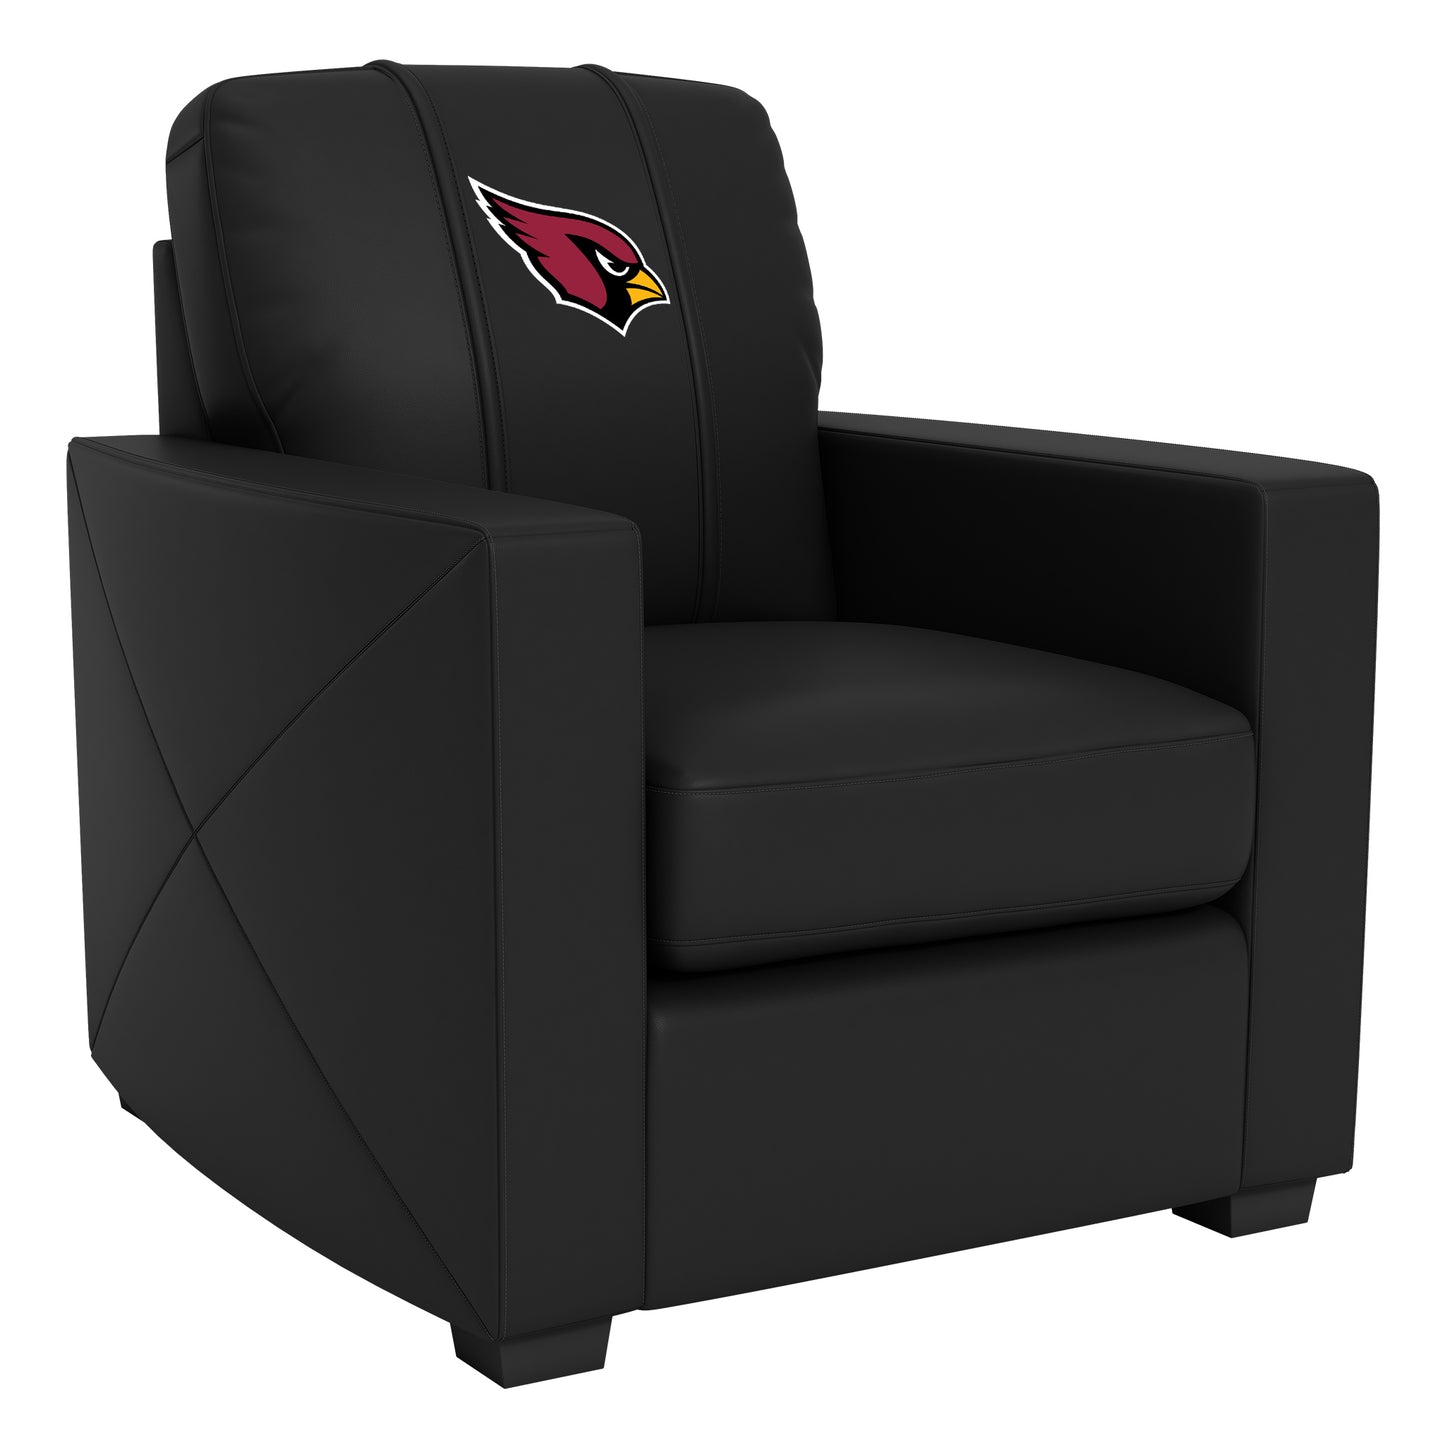 Silver Club Chair with Arizona Cardinals Primary Logo